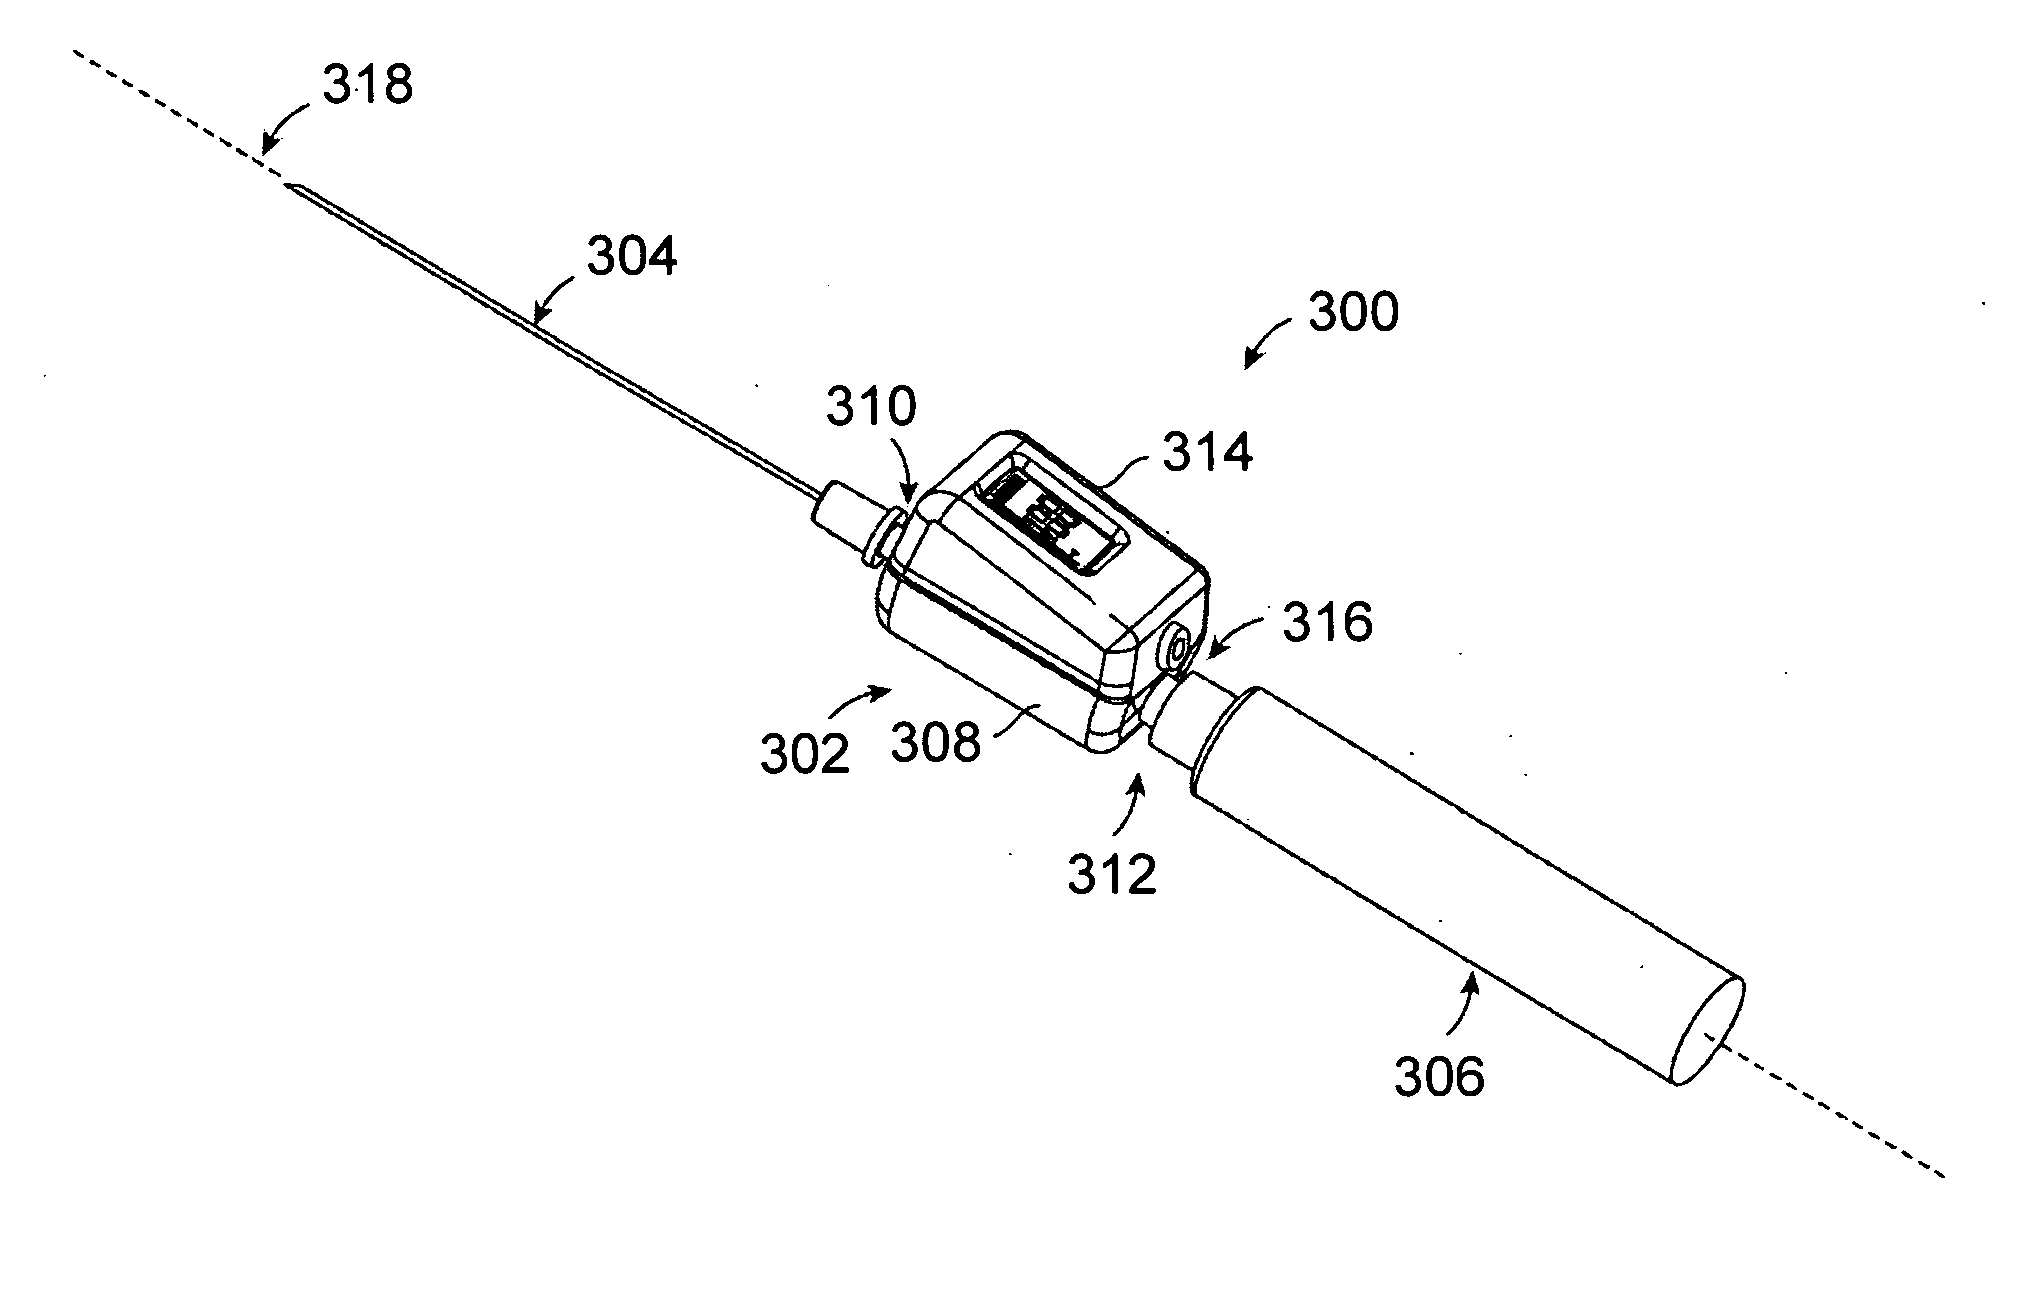 Spinal canal access and probe positioning, devices and methods